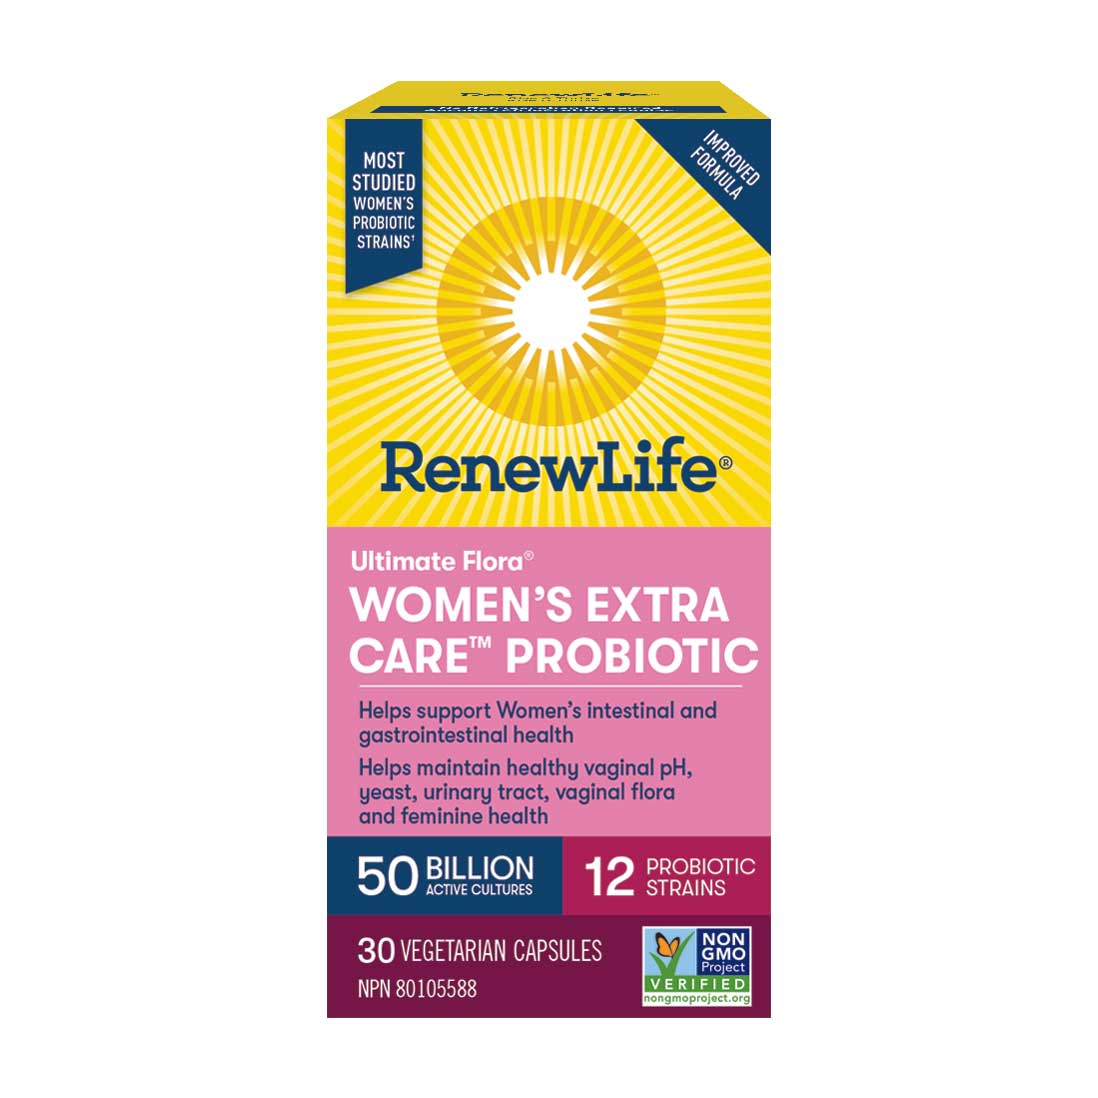 Renew Life Ultimate Flora Women’s Extra Care Probiotic, 50 B (30 VCaps) - Lifestyle Markets